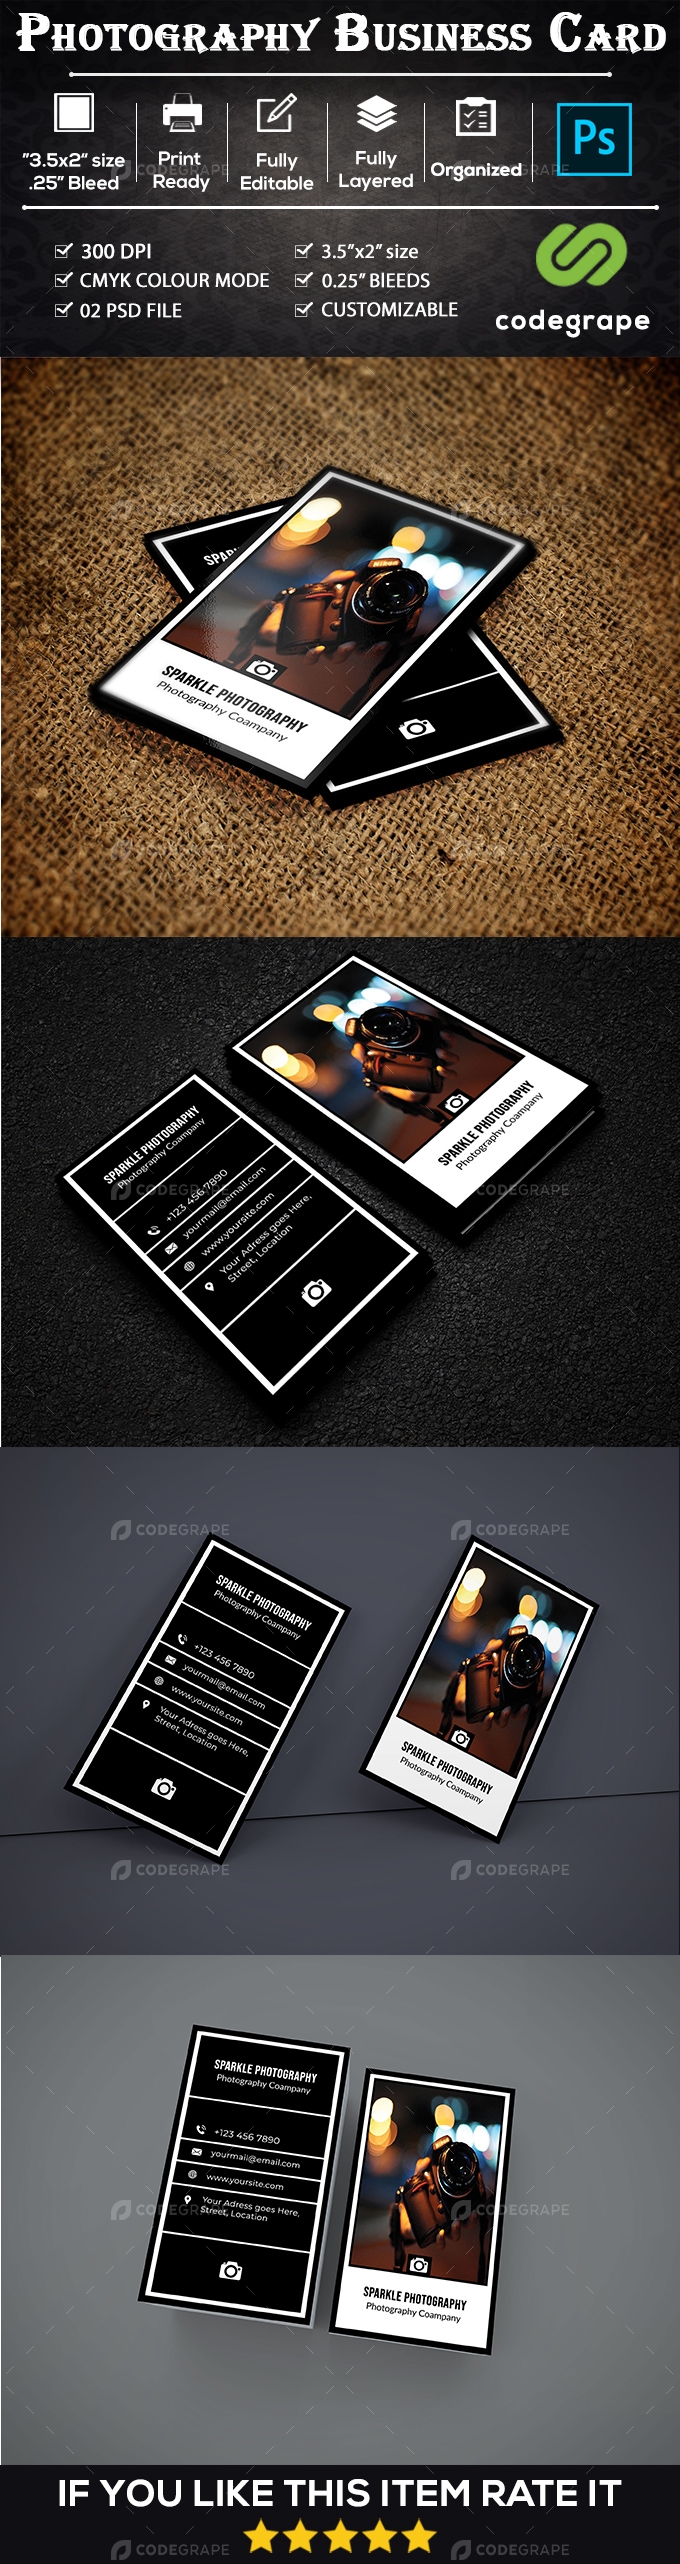 Photography Company Business Card